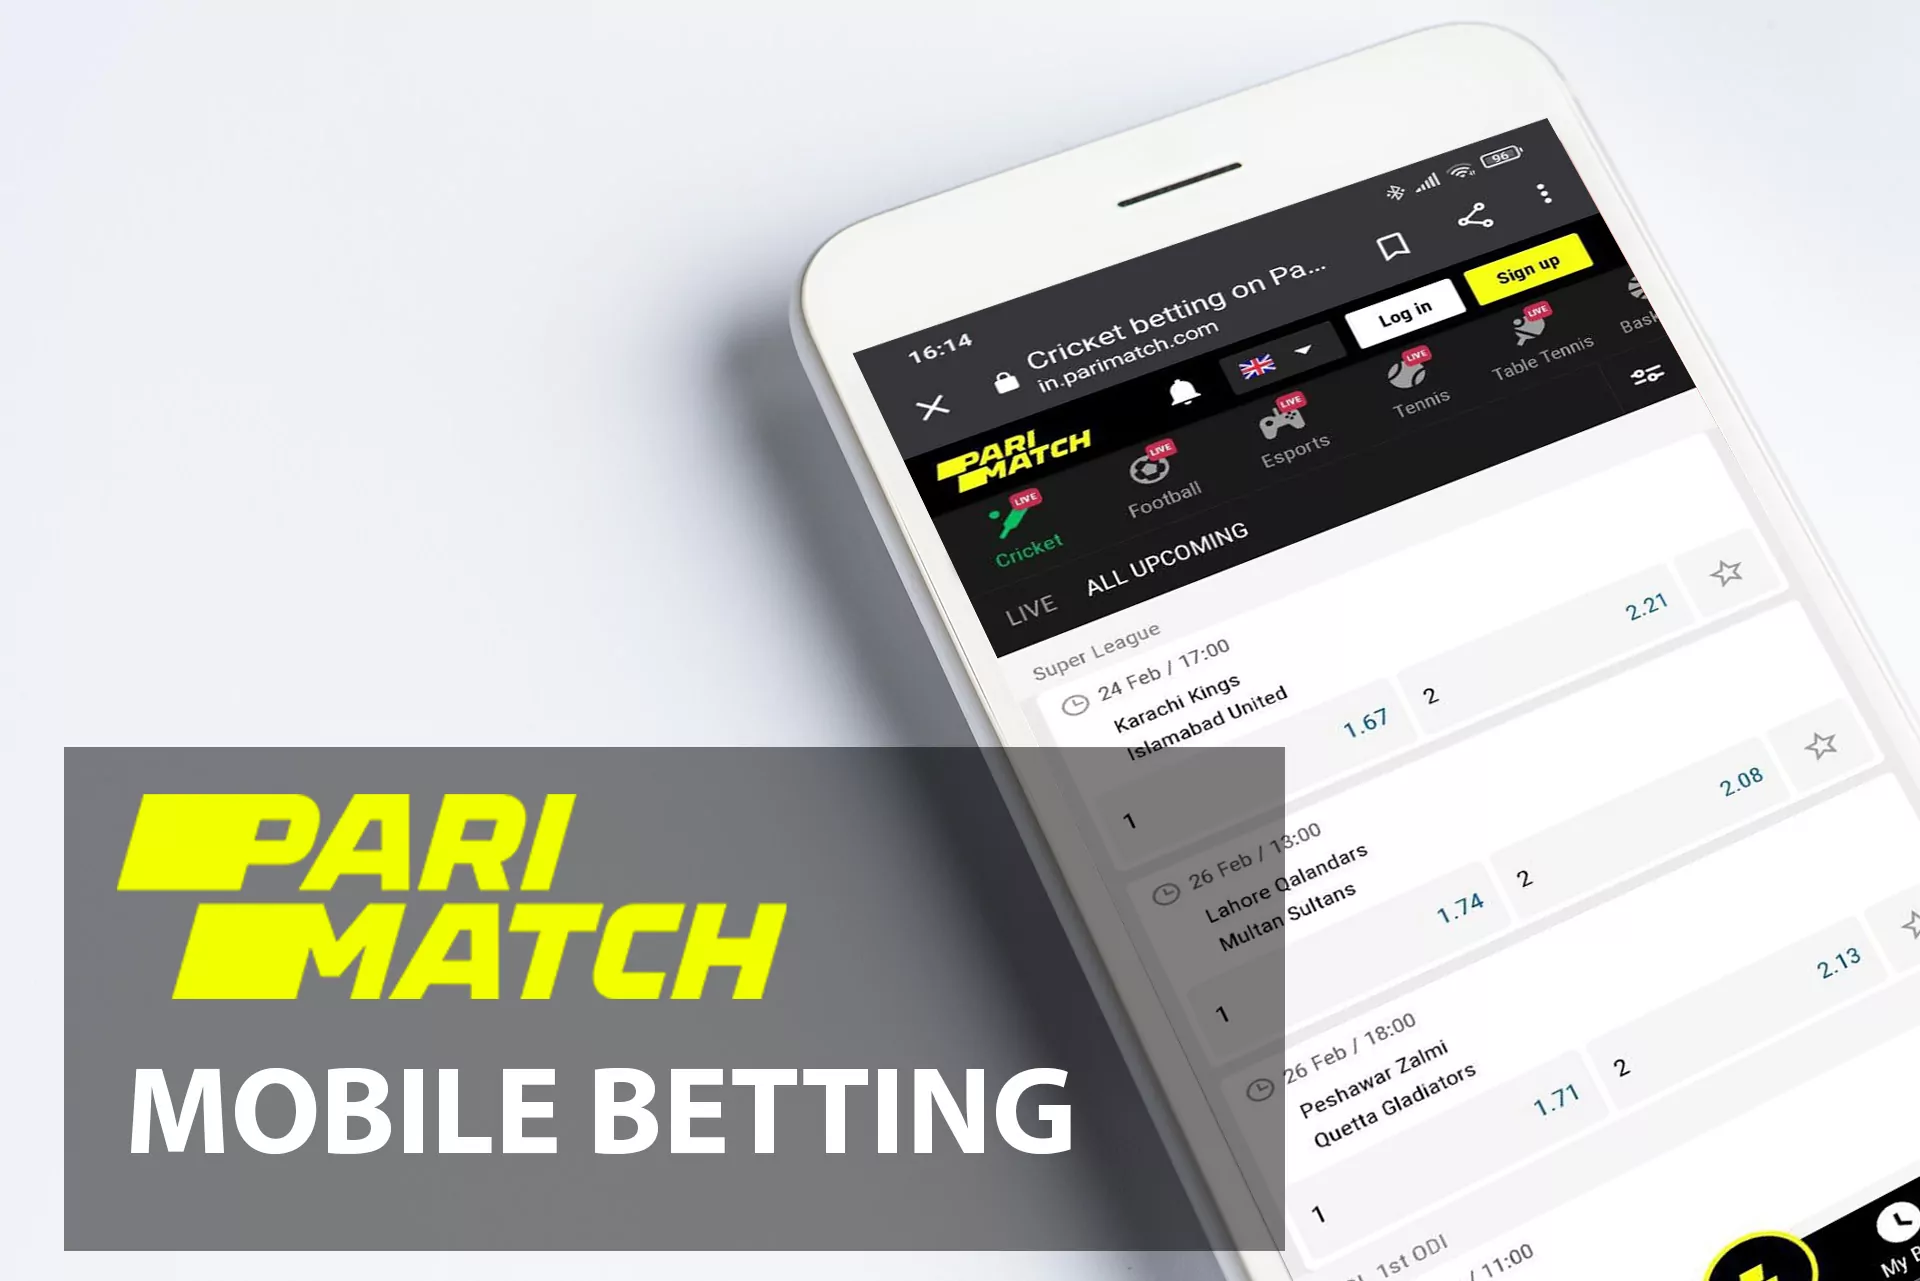 Parimatch mobile web version allows users to betting without download anything, provided user-friendly interface and almost doesn't have differ with android or iOS app version